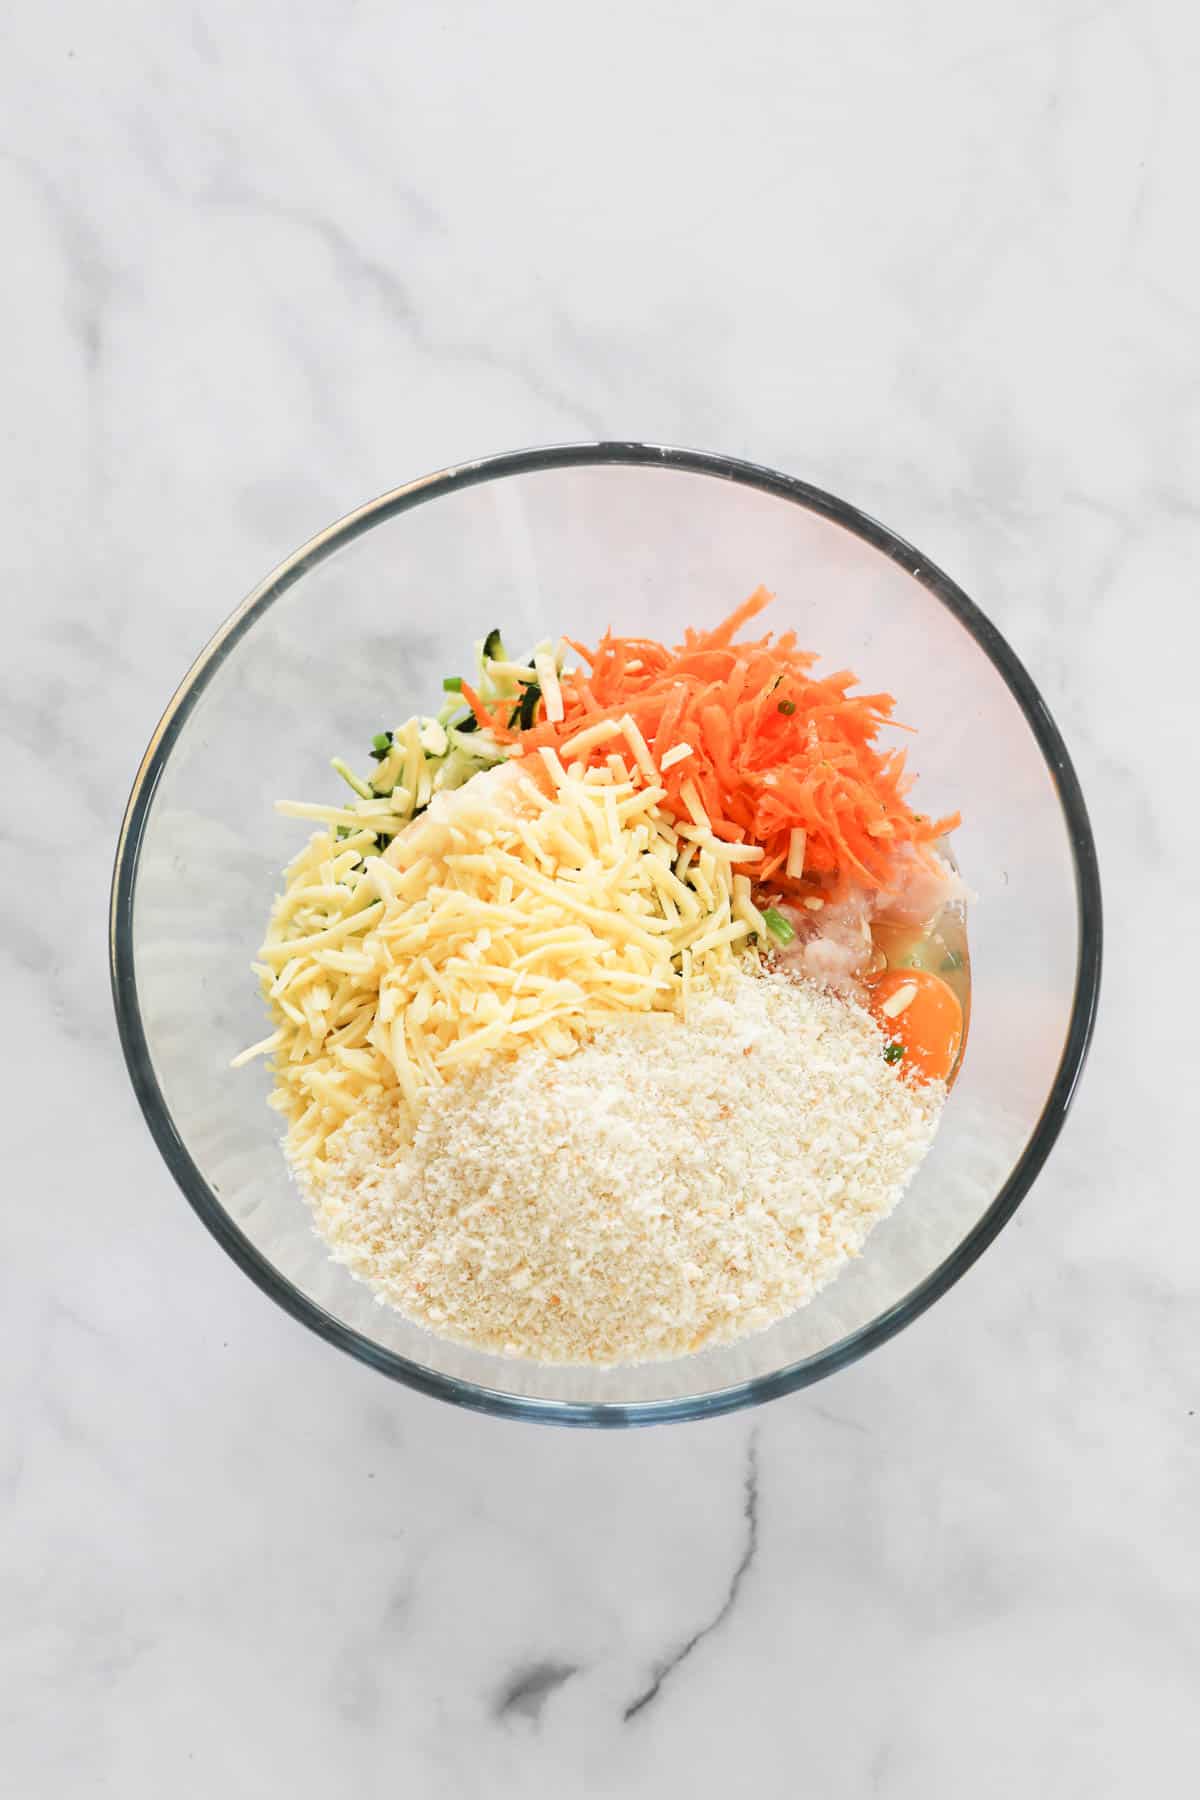 Breadcrumbs, grated veggies and cheese in a glass bowl.